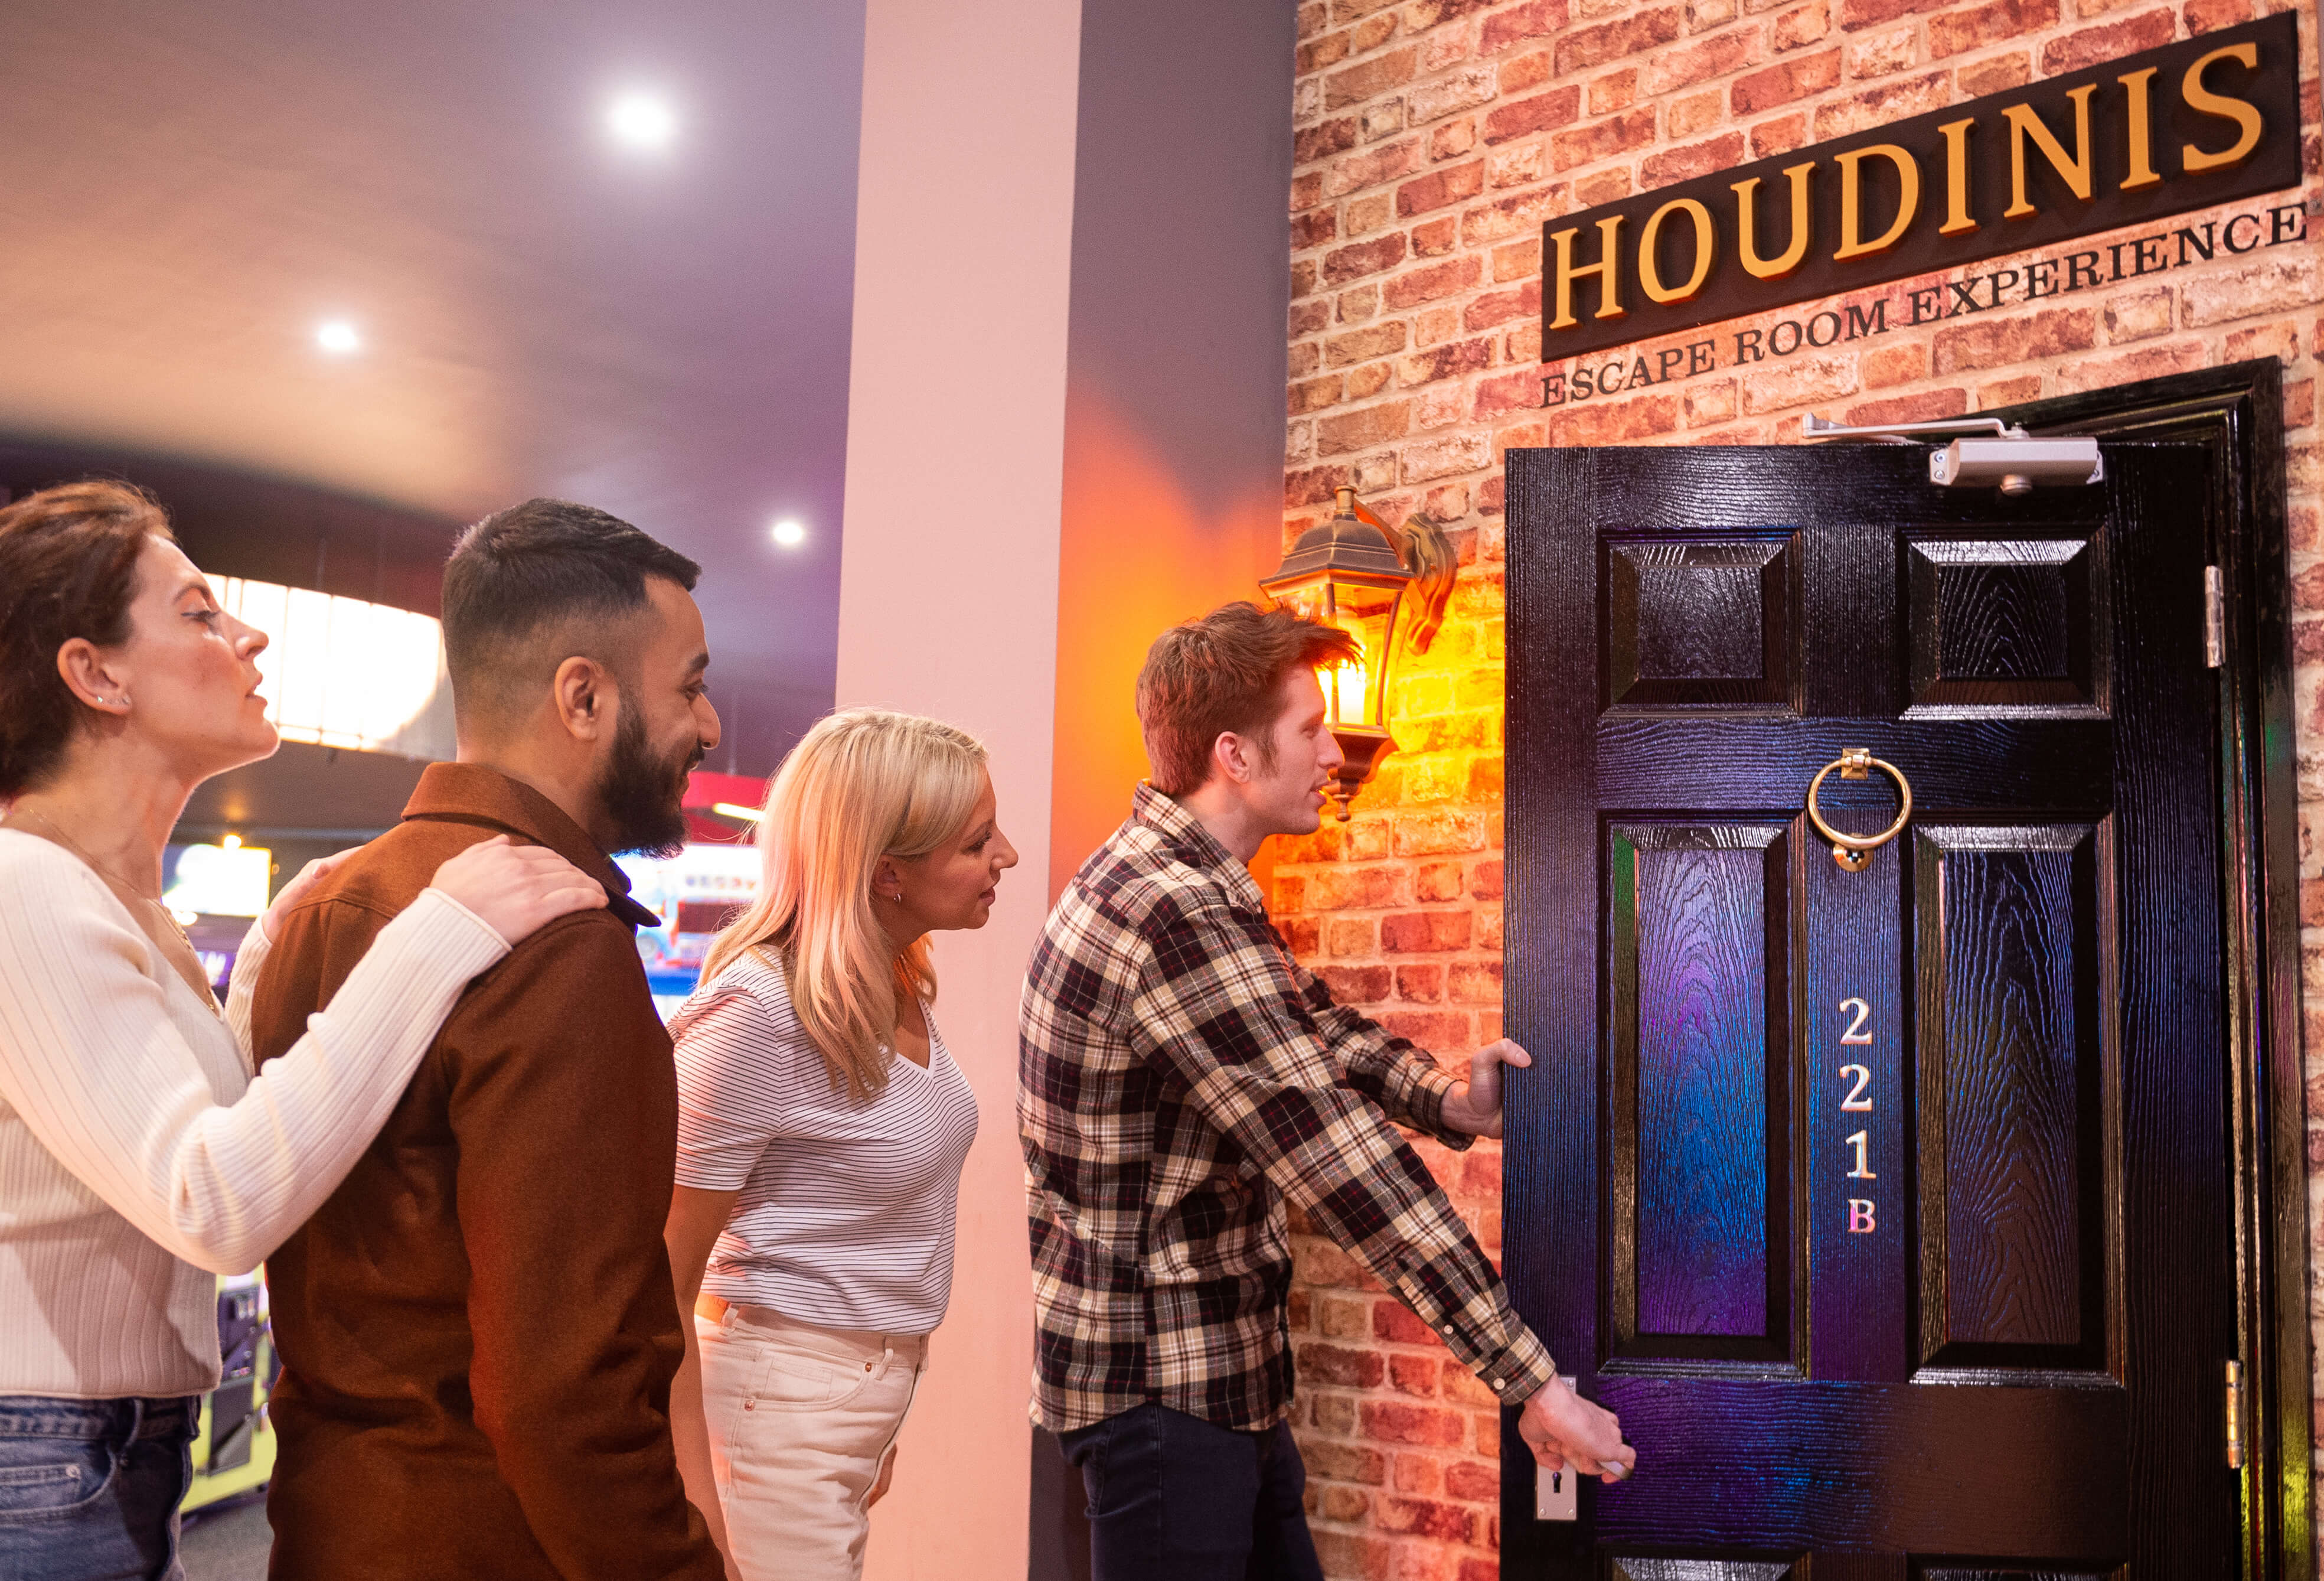 Friends Escape Rooms Houdinis